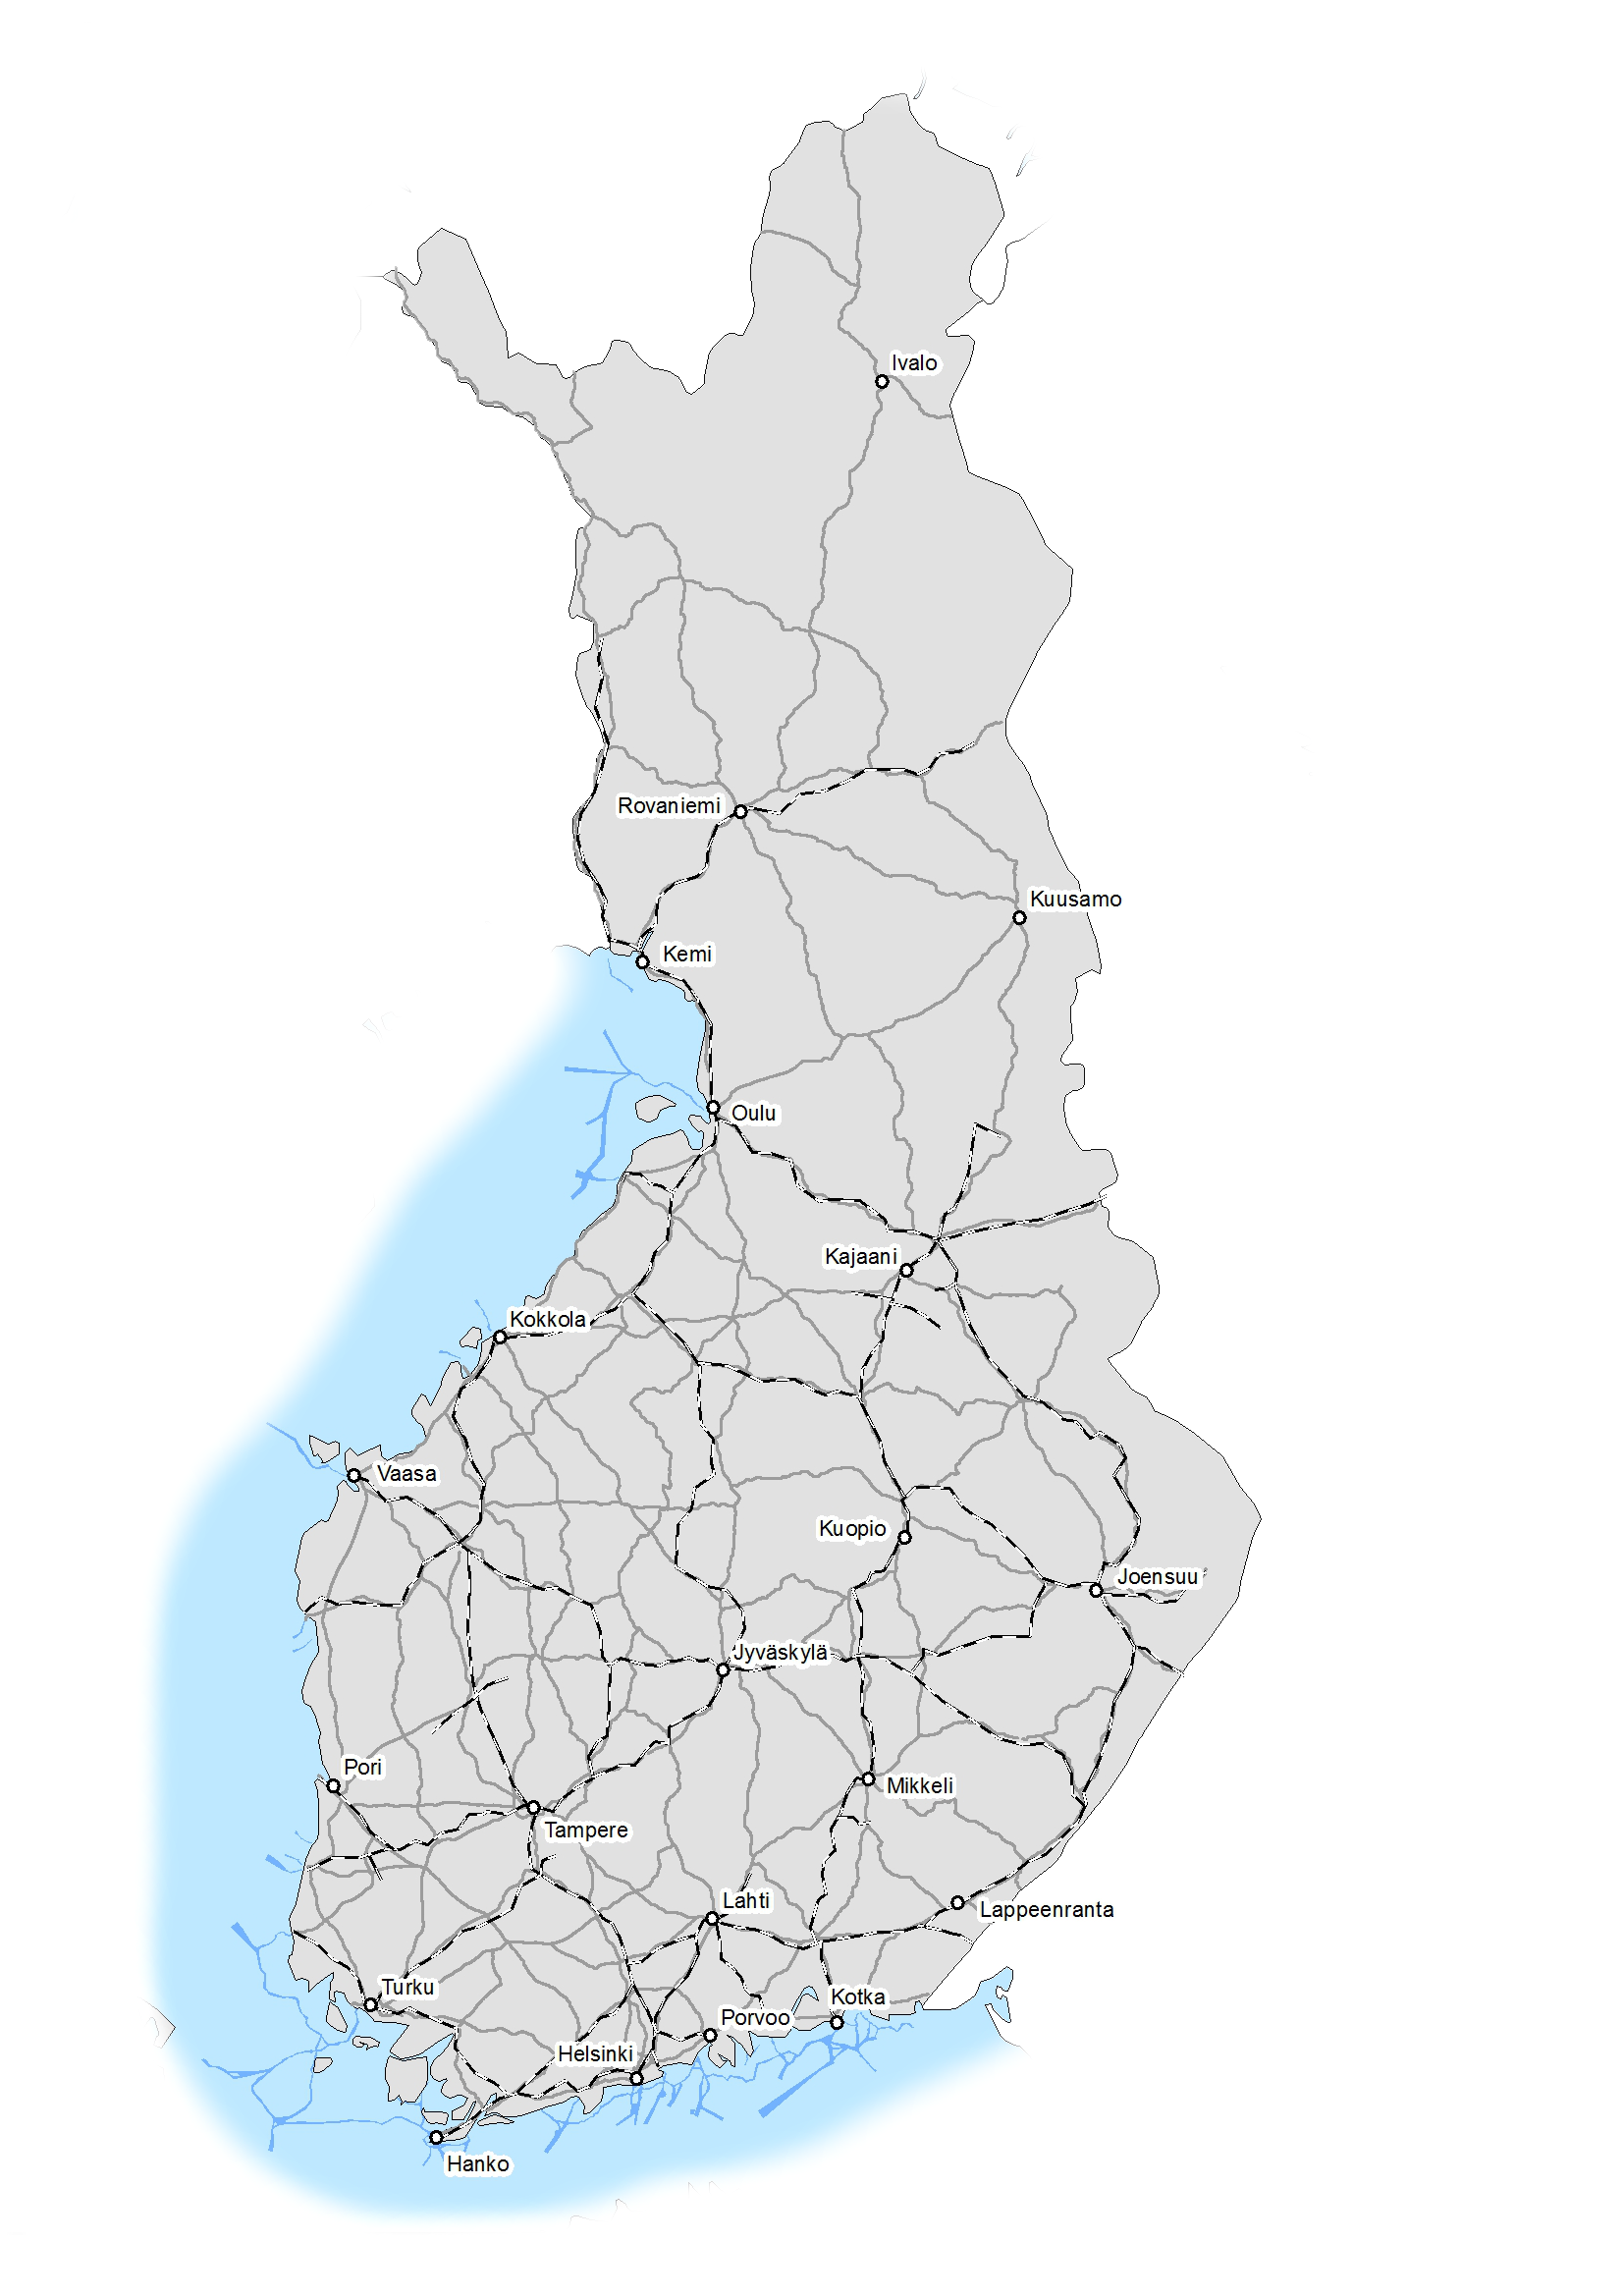 PPP-projects in Finland E75 Järvenpää Lahti motorway (1) Opened to traffic 1999 Concession period 1997 2012 E18 Muurla Lohja motorway (2) Opened to traffic 2008/2009 Concession period 2005 2029 E18